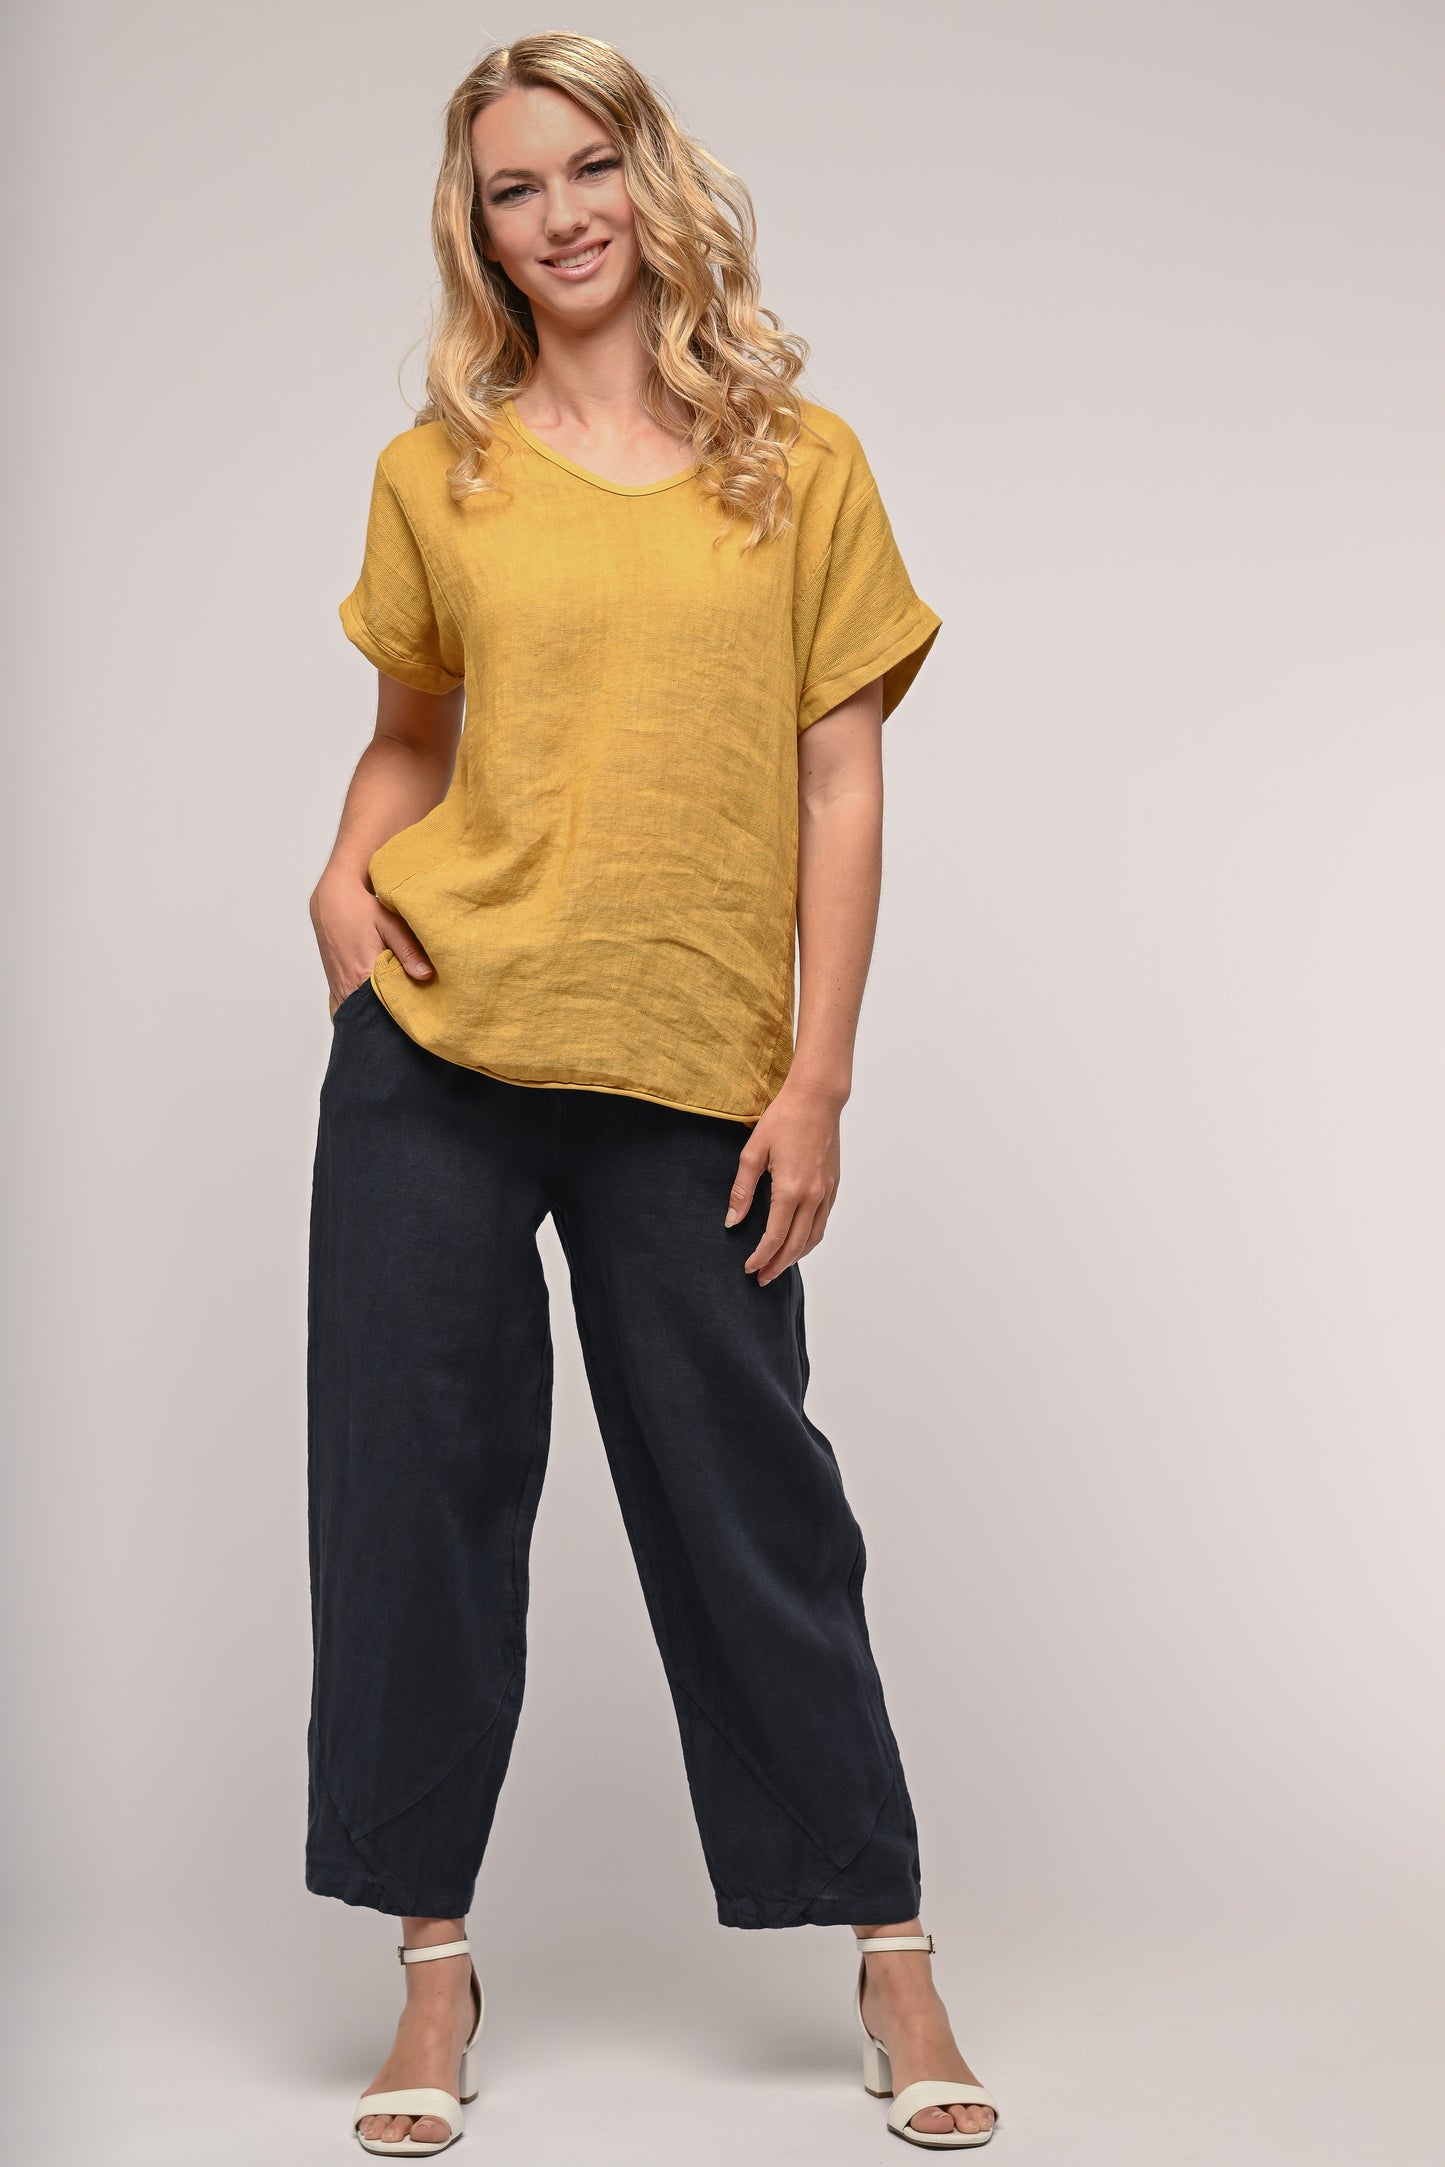 LINEN LUV French Linen Top TP864